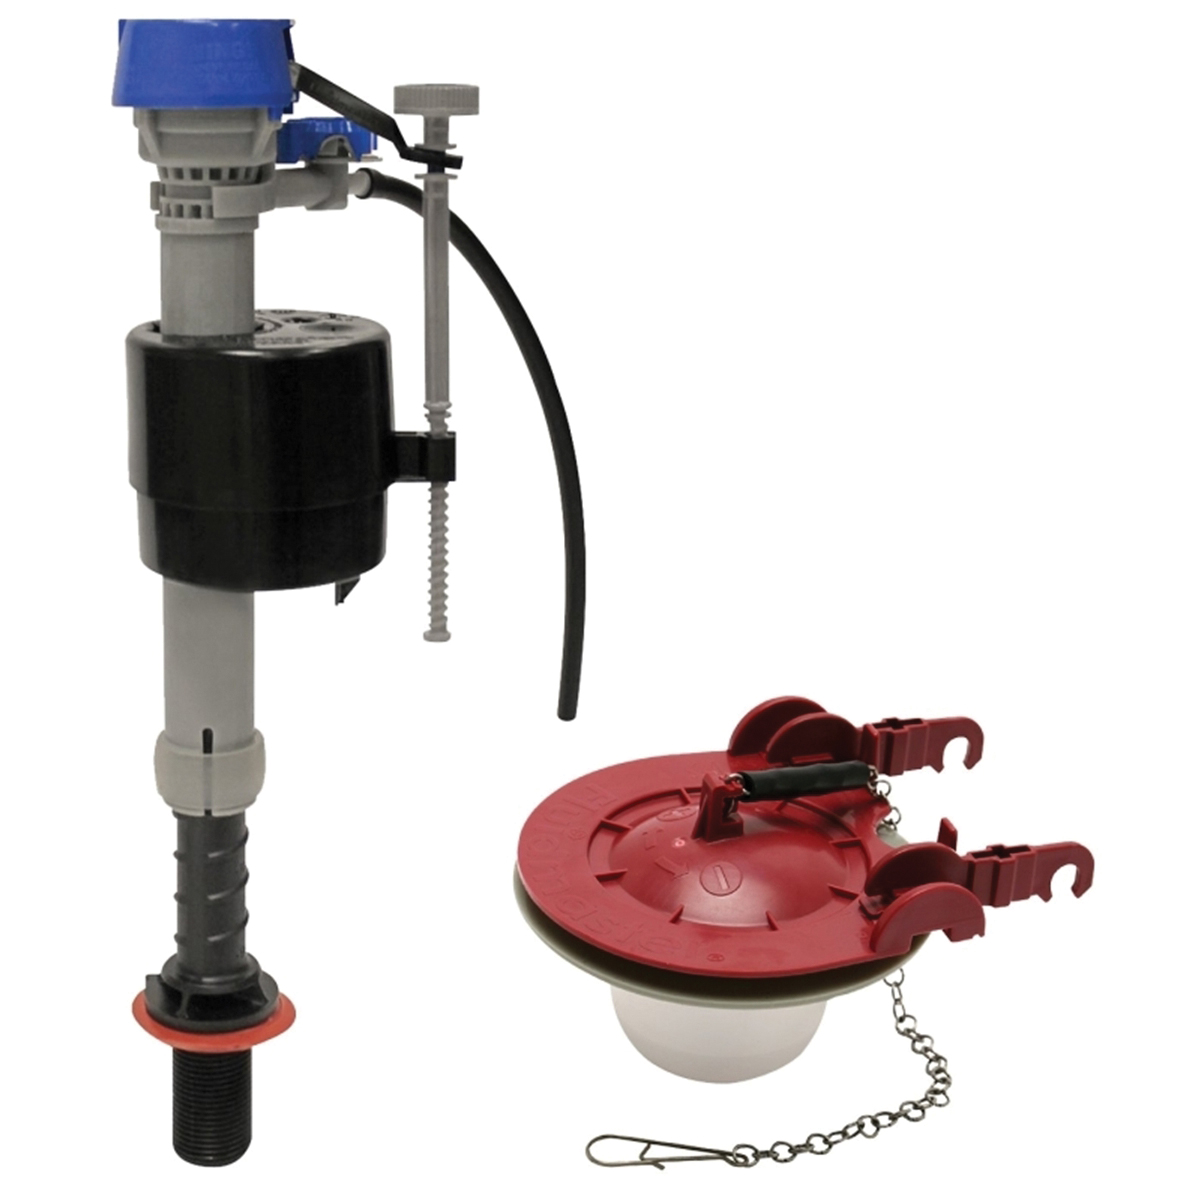 PerforMAX Series K-400H-040-T5 Fill Valve and Flapper Kit